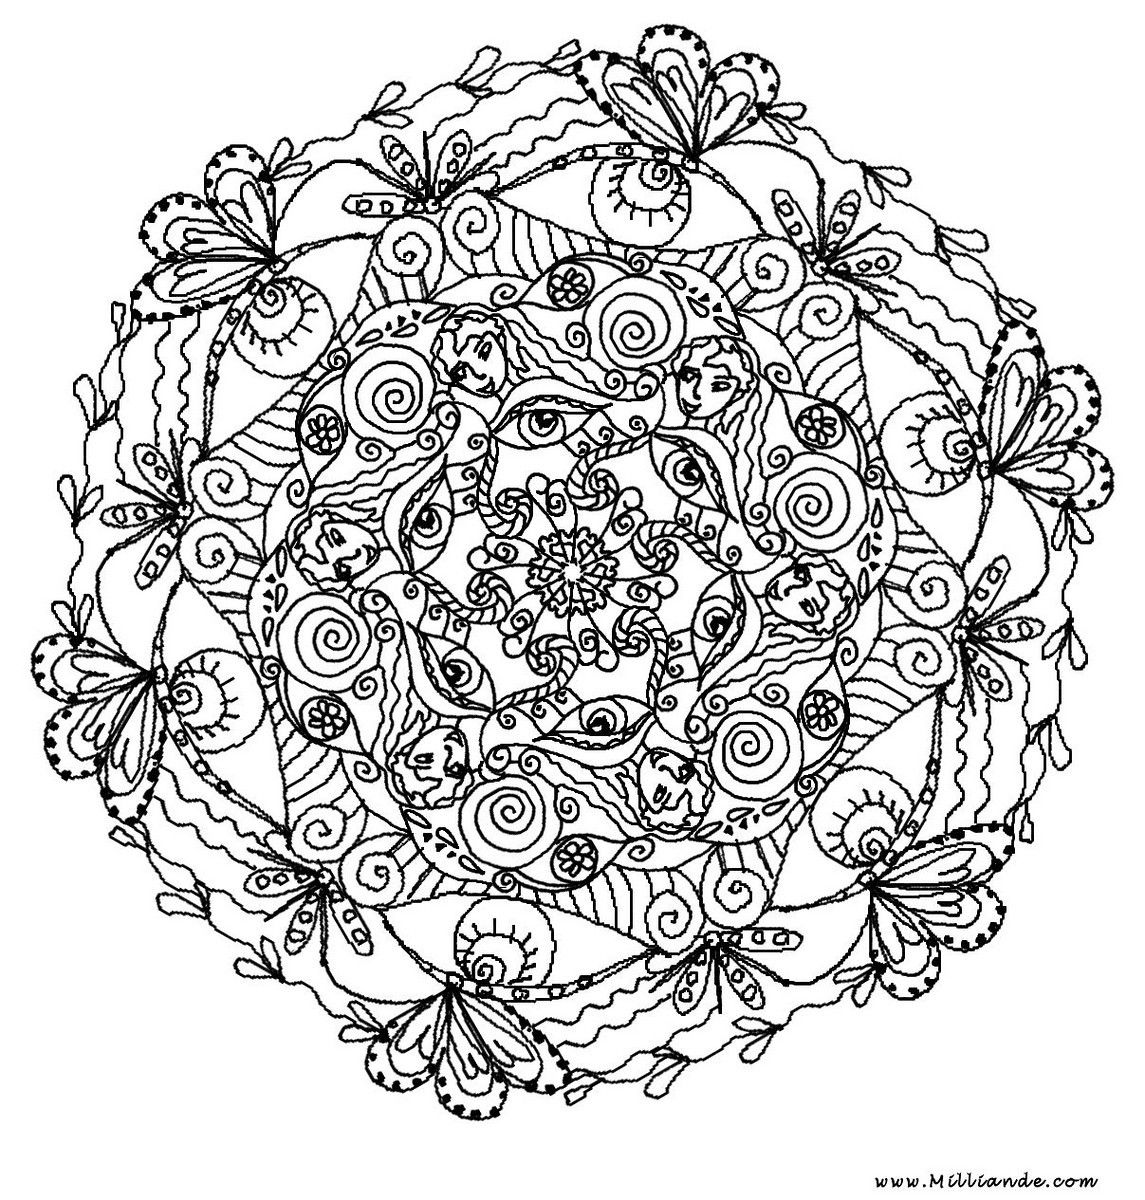 Christmas Coloring Book Mandalas: Lesley Riley's new book is out ...